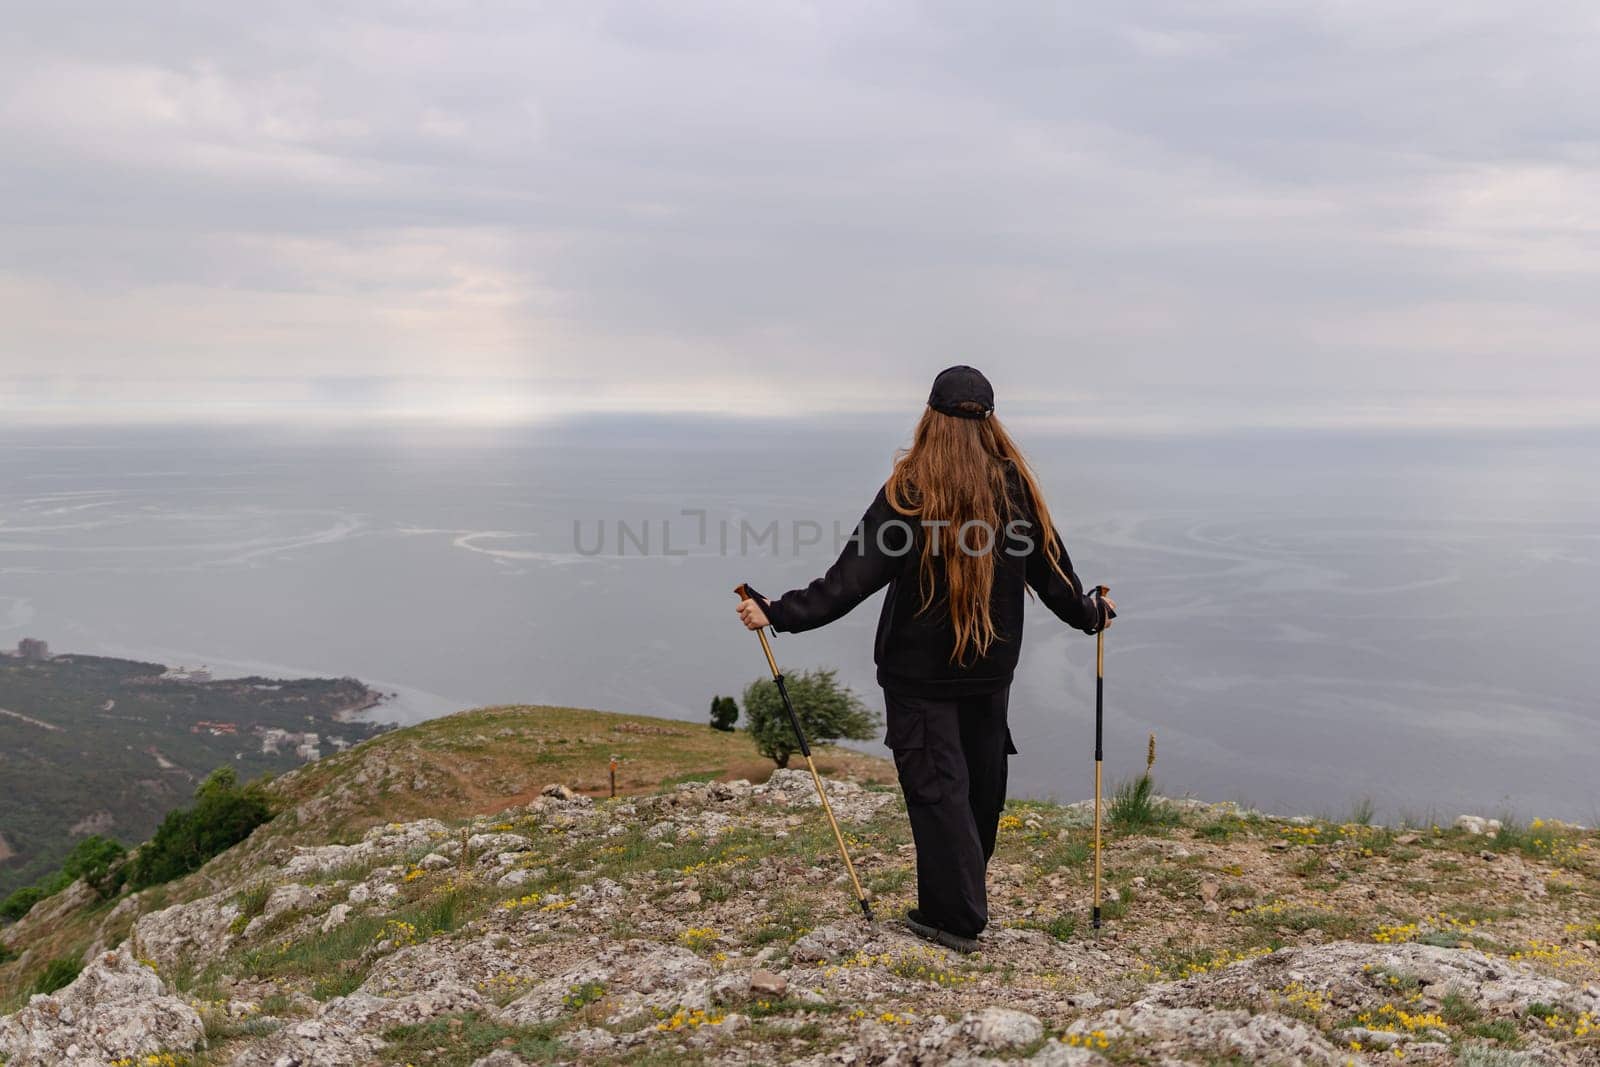 A woman with long hair is standing on a hill overlooking the ocean. She is holding two poles and she is enjoying the view